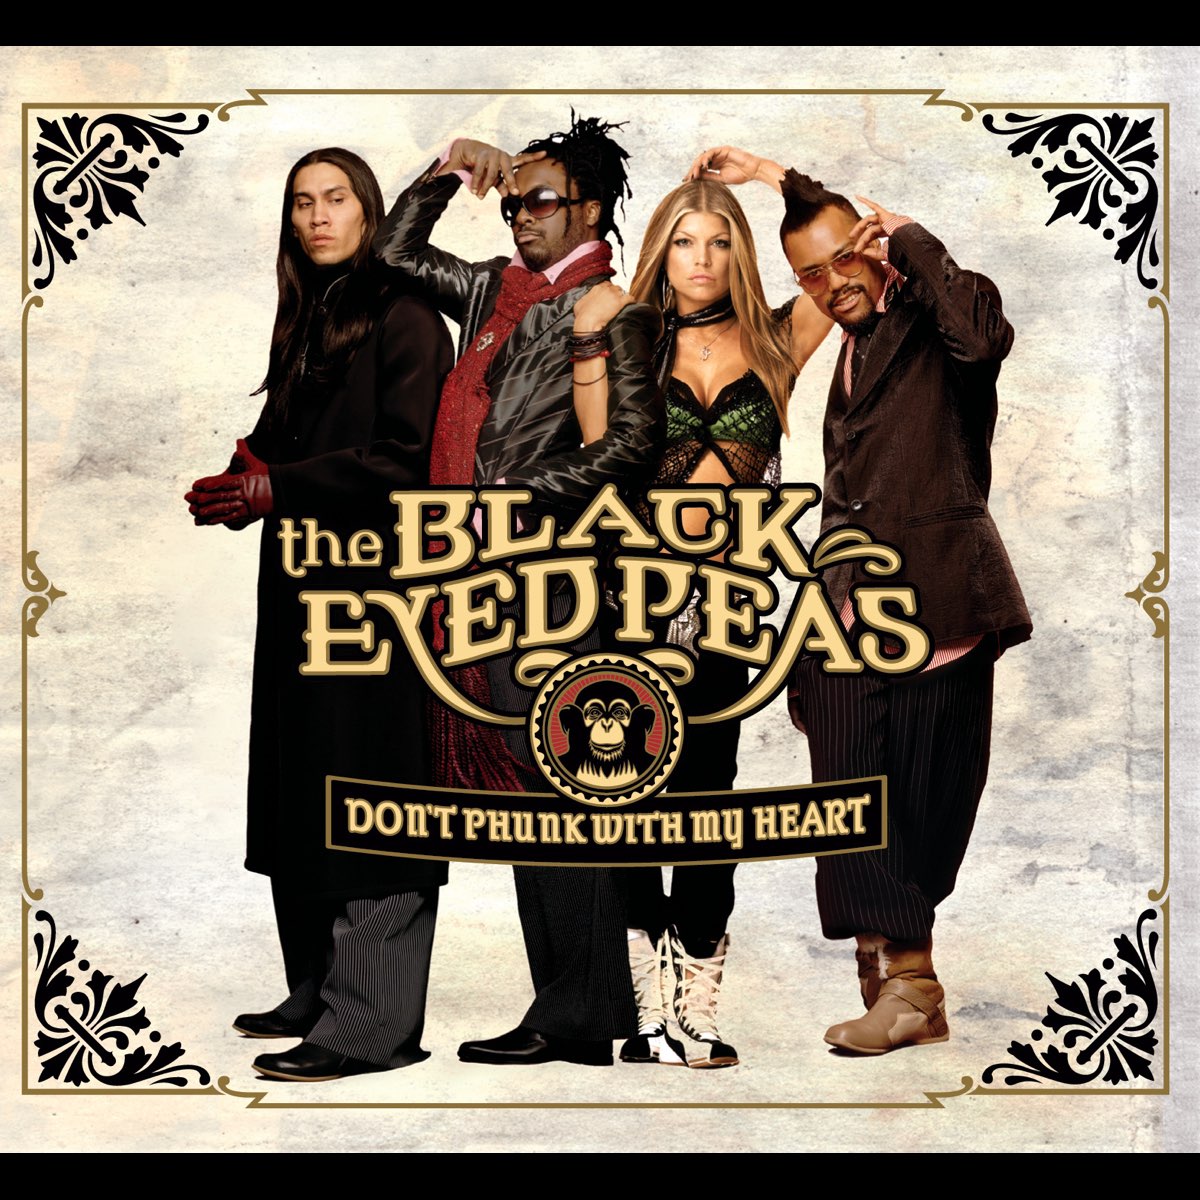 Don't Phunk With My Heart - Single by Black Eyed Peas on Apple Music